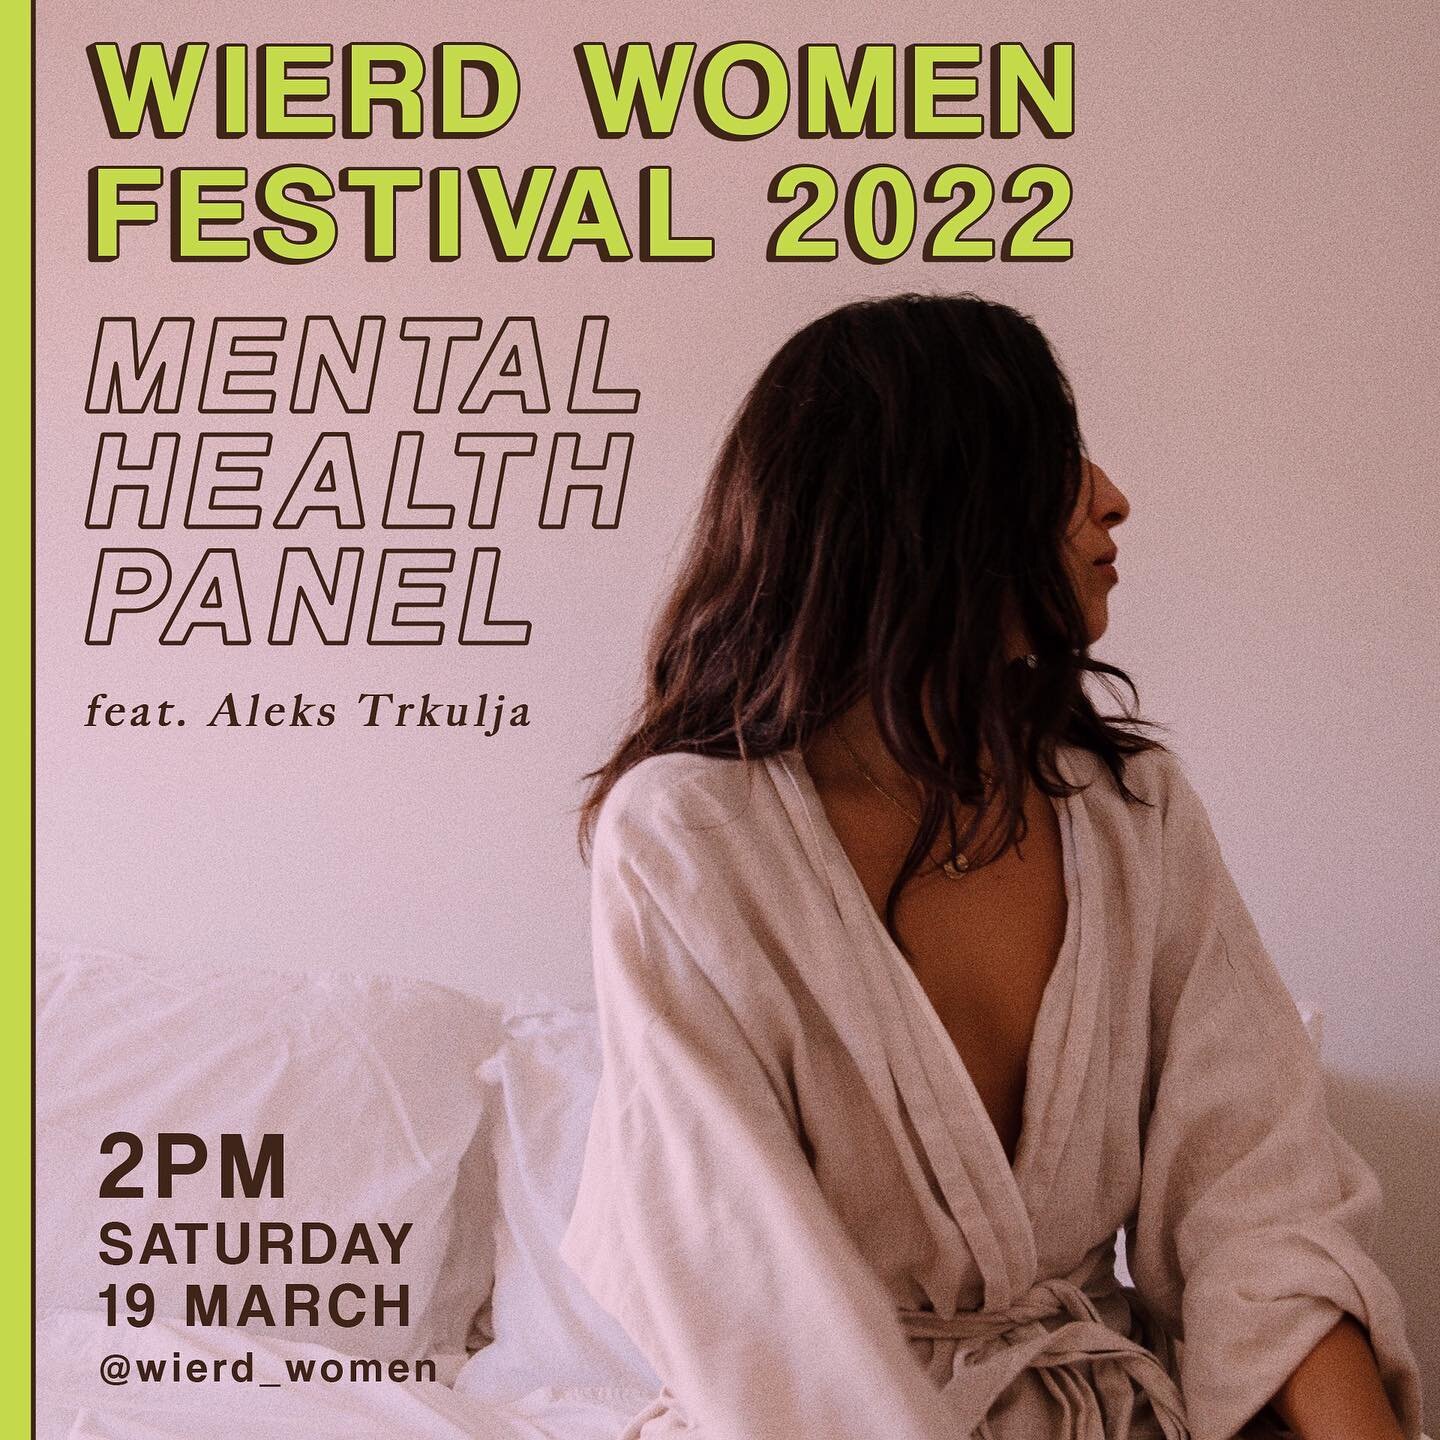 ✨Announcement! Aleks will be speaking on the Mental Health Panel at the Wierd Women Festival. 3 days and 2 nights of workshops, panels, talks, music, performance and markets. 

Join Aleks at 2pm on the 19th.
Follow the links via @wierd_women for entr